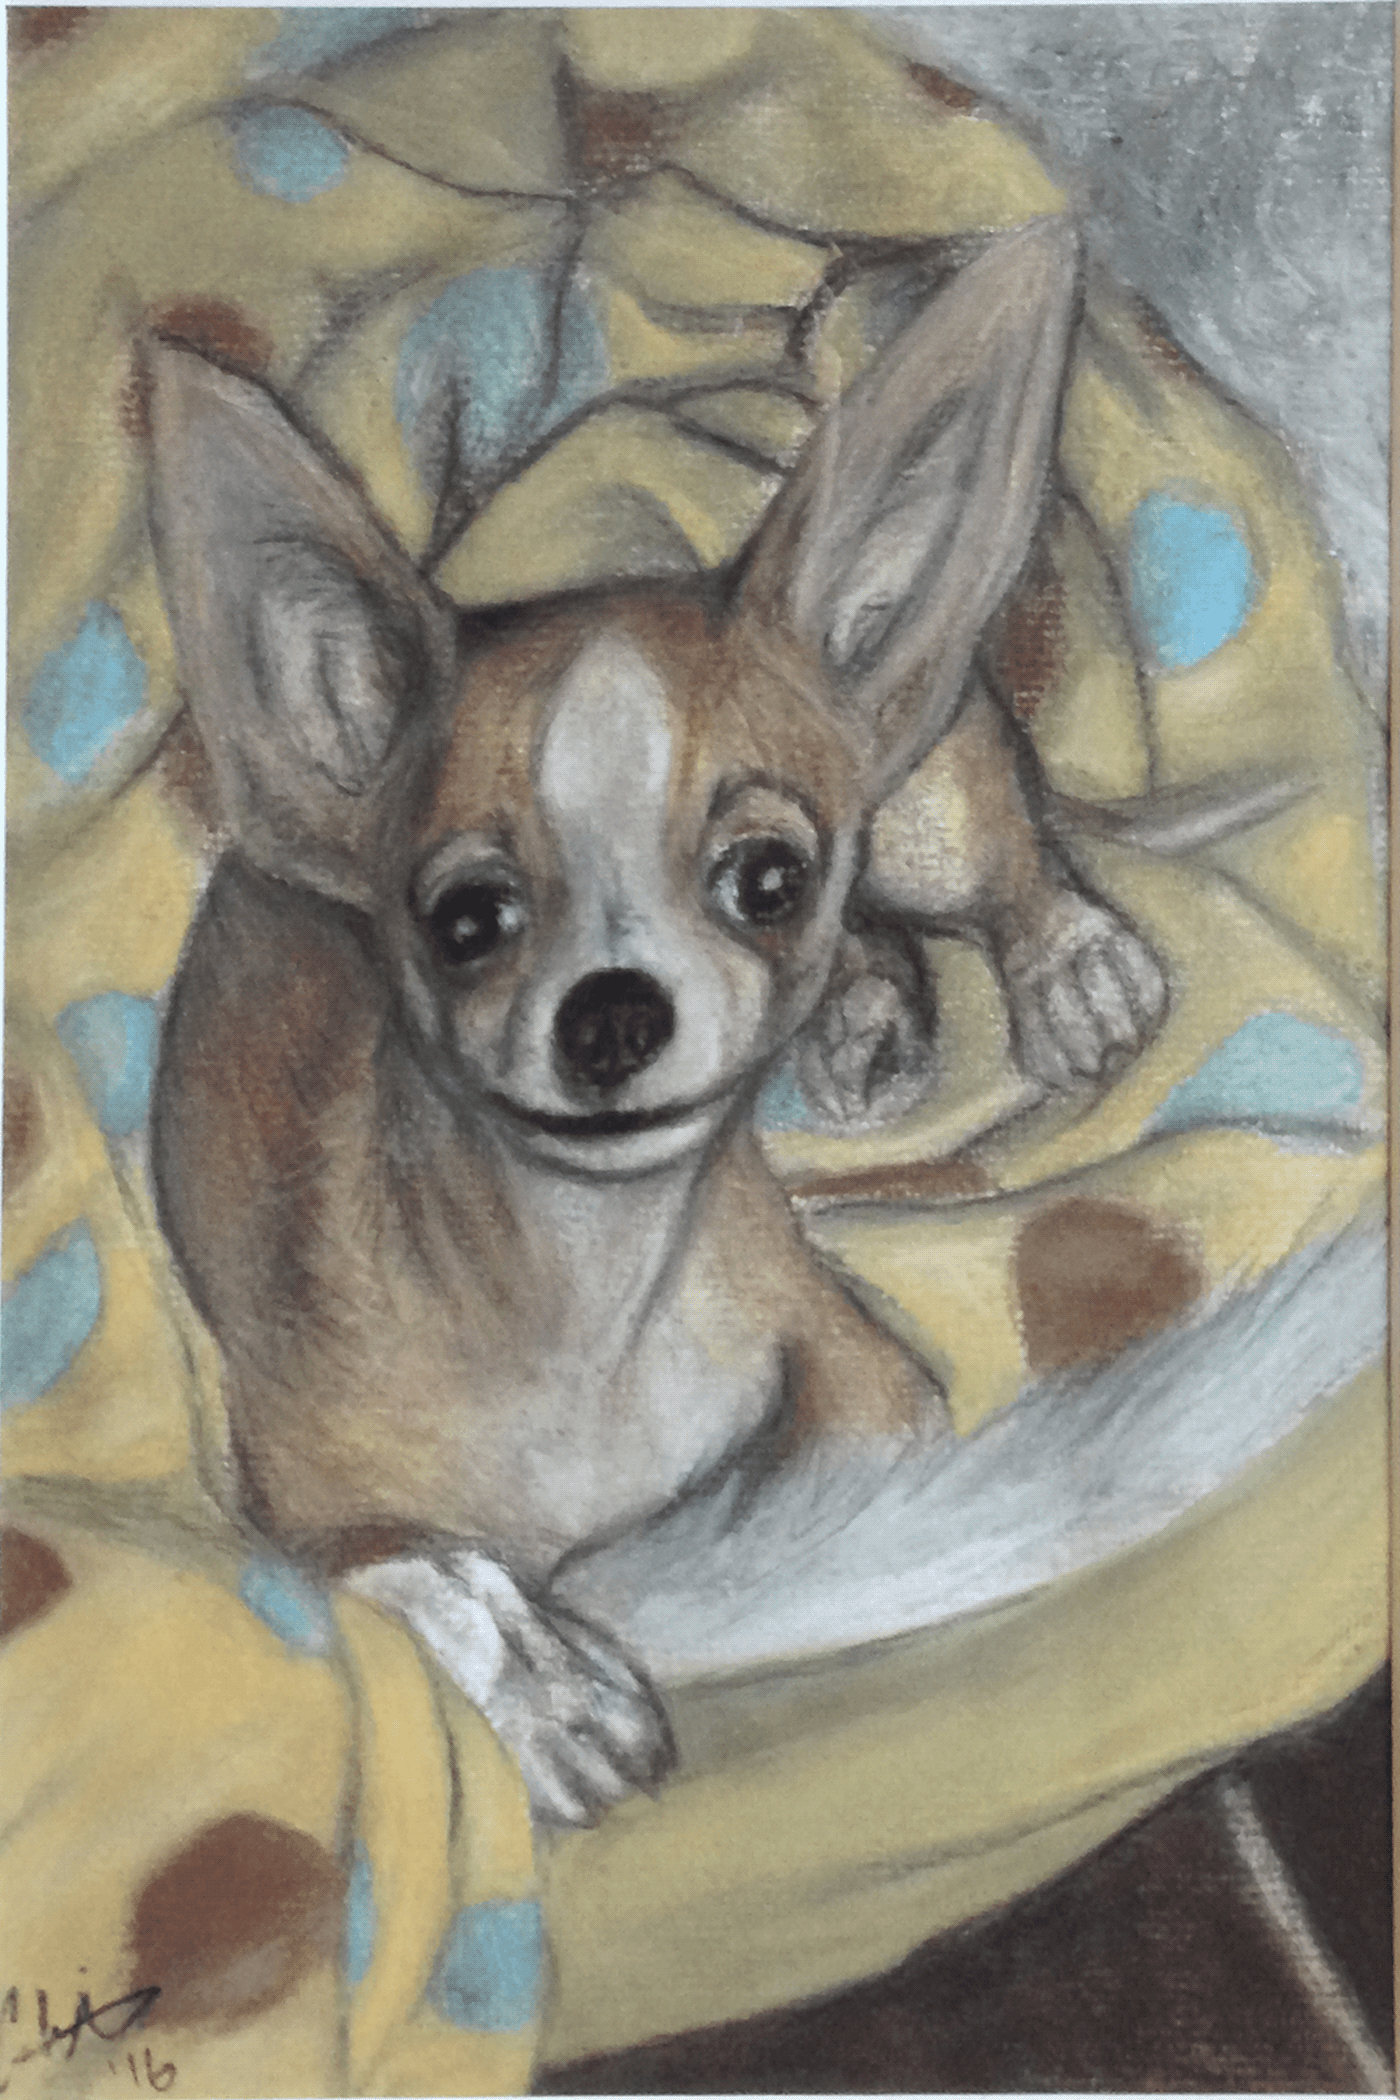 Pastel and charcoal portrait of my pet chihuahua Bogart in his bed when he was a puppy